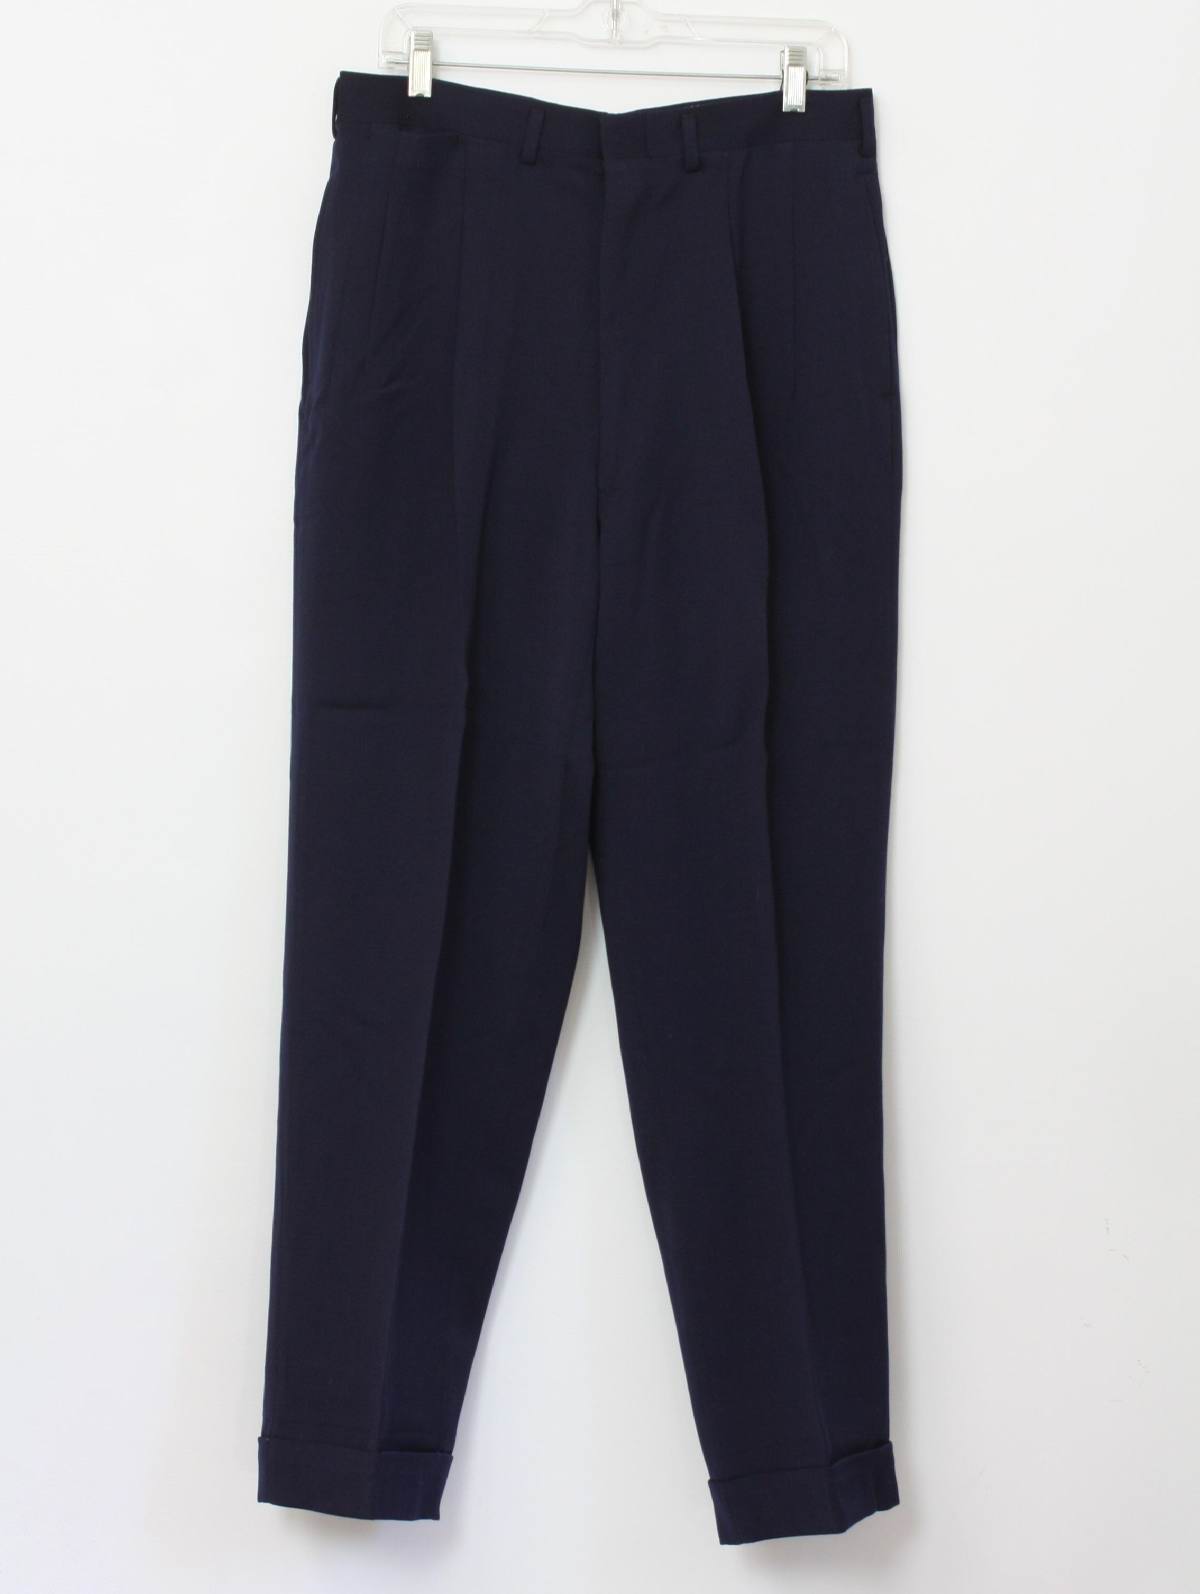 Vintage 1940's Pants: Late 40s -No Label- Mens navy blue drapey wool ...